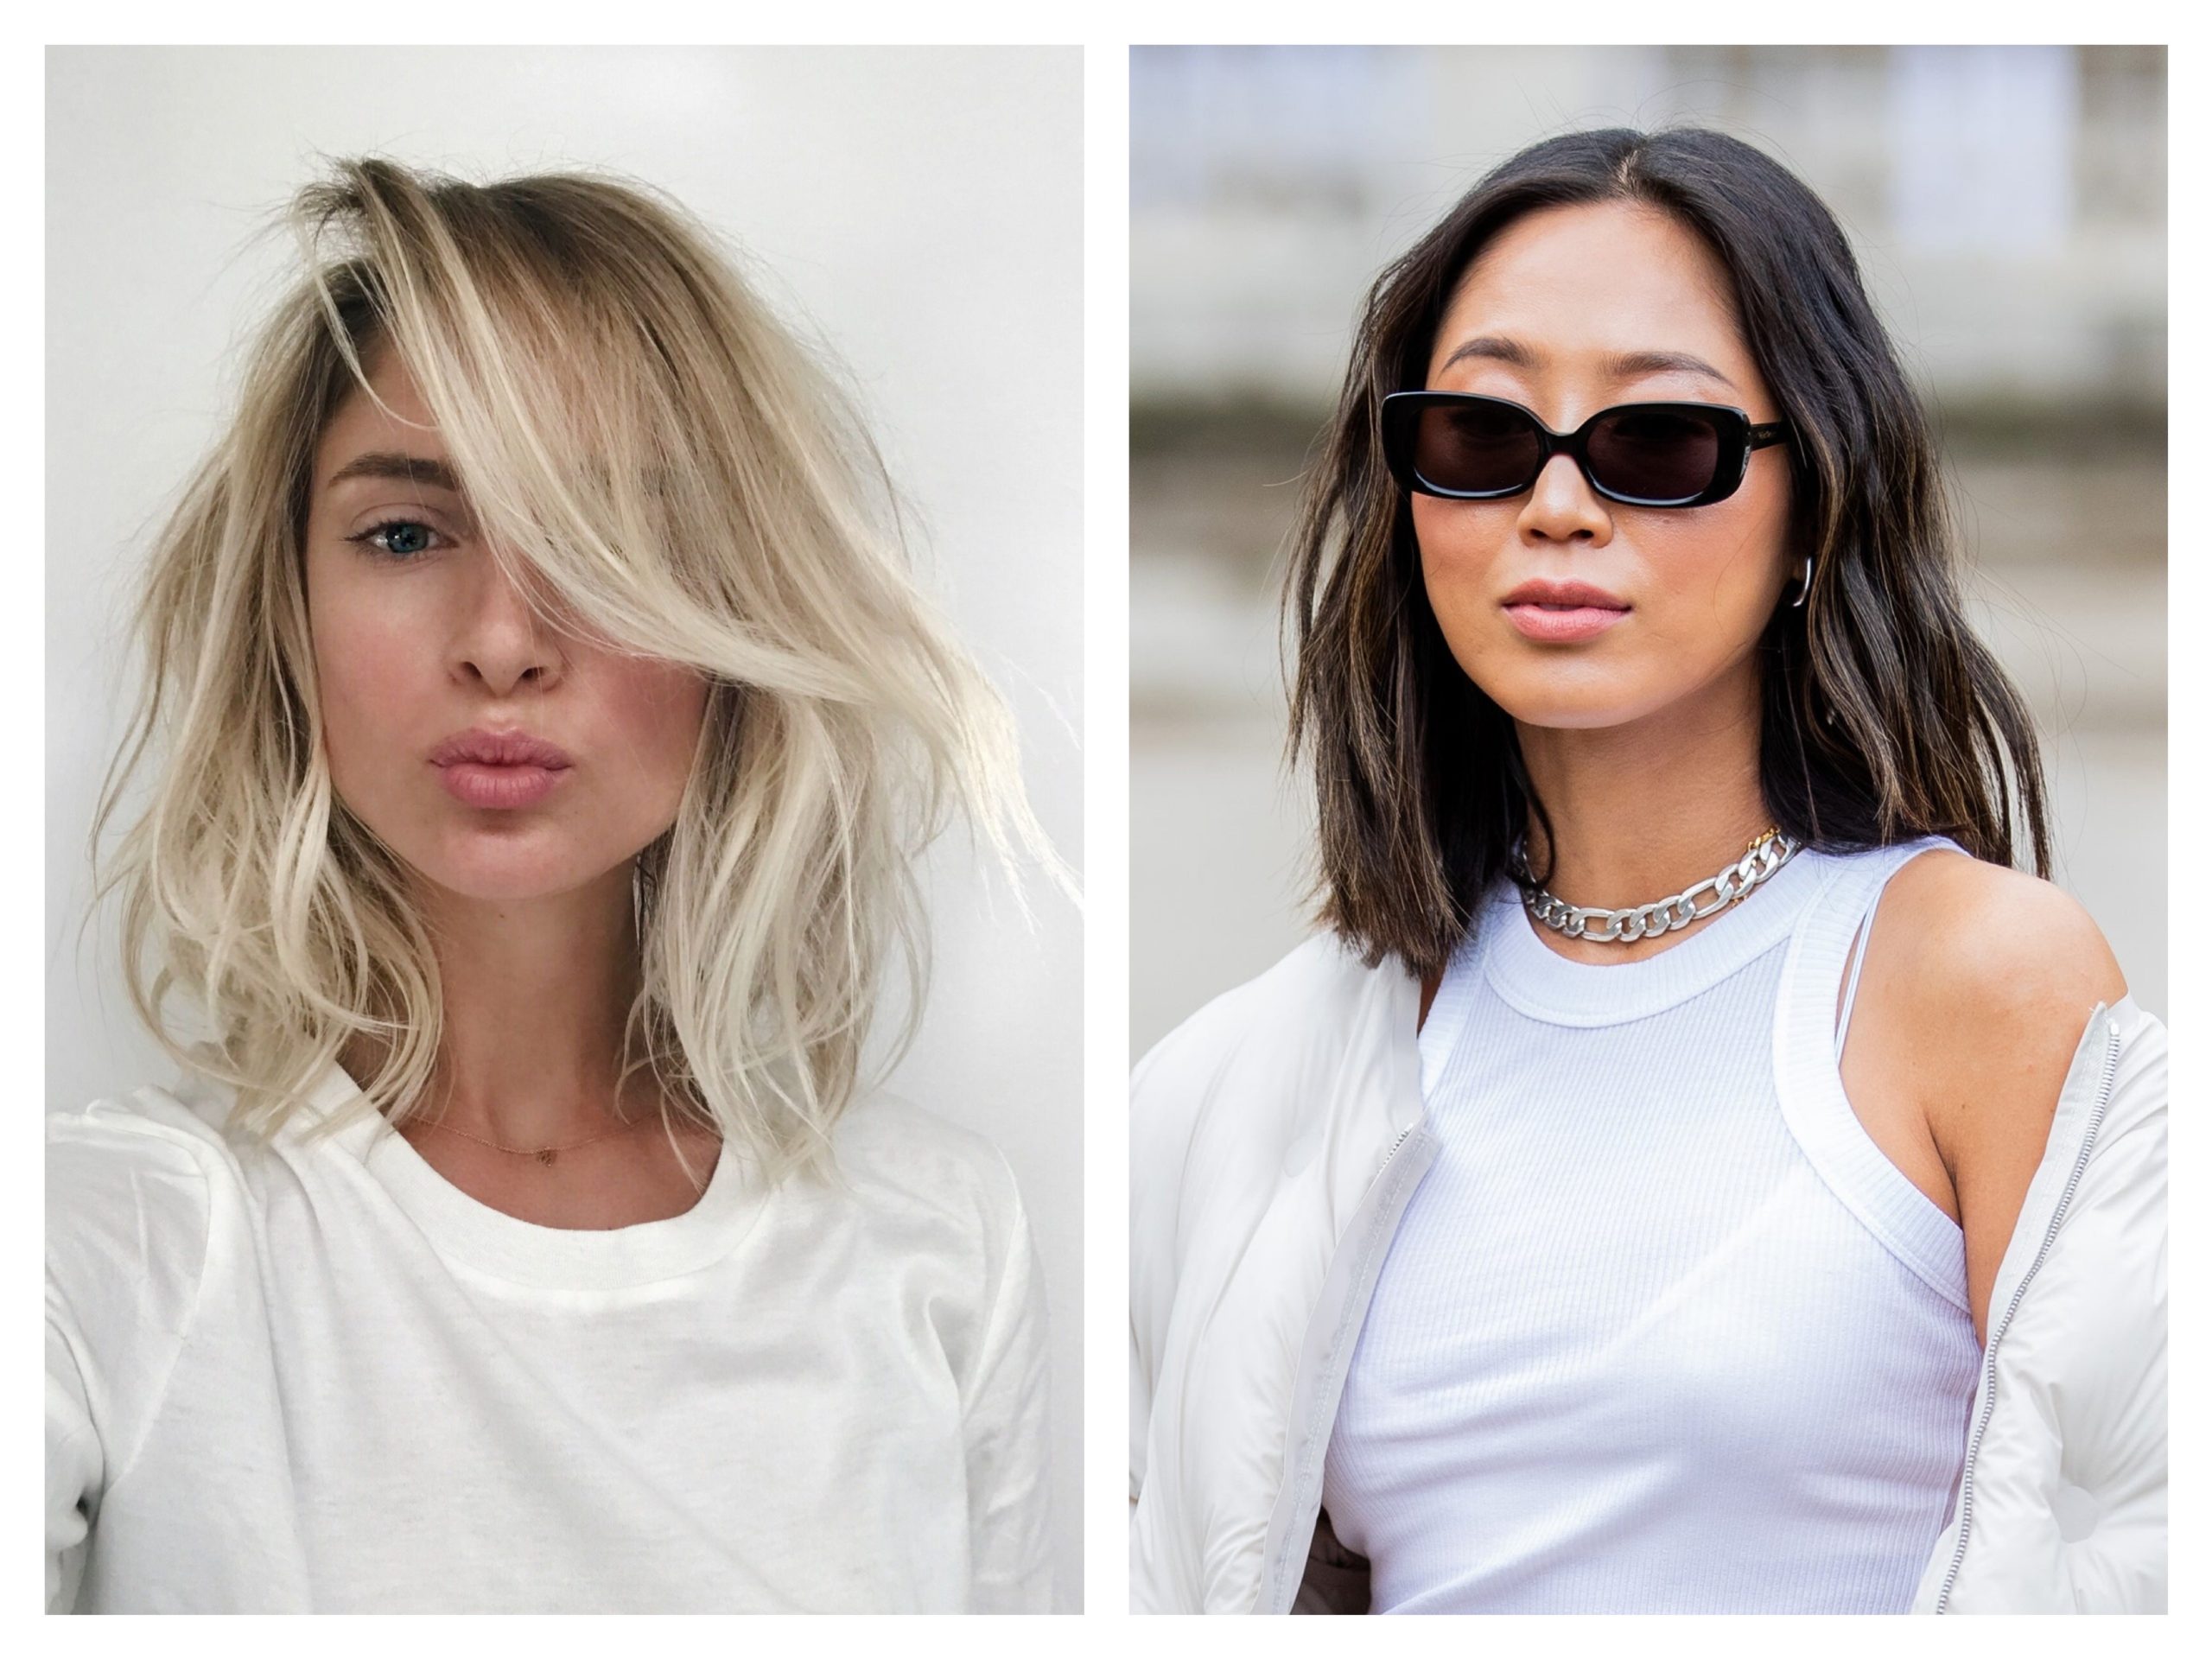 https://mosaichairgroup.com/wp-content/uploads/Mosaic-Hair-Group-Spring-Summer-2020-Trends_French-Girl-Lob-scaled.jpg